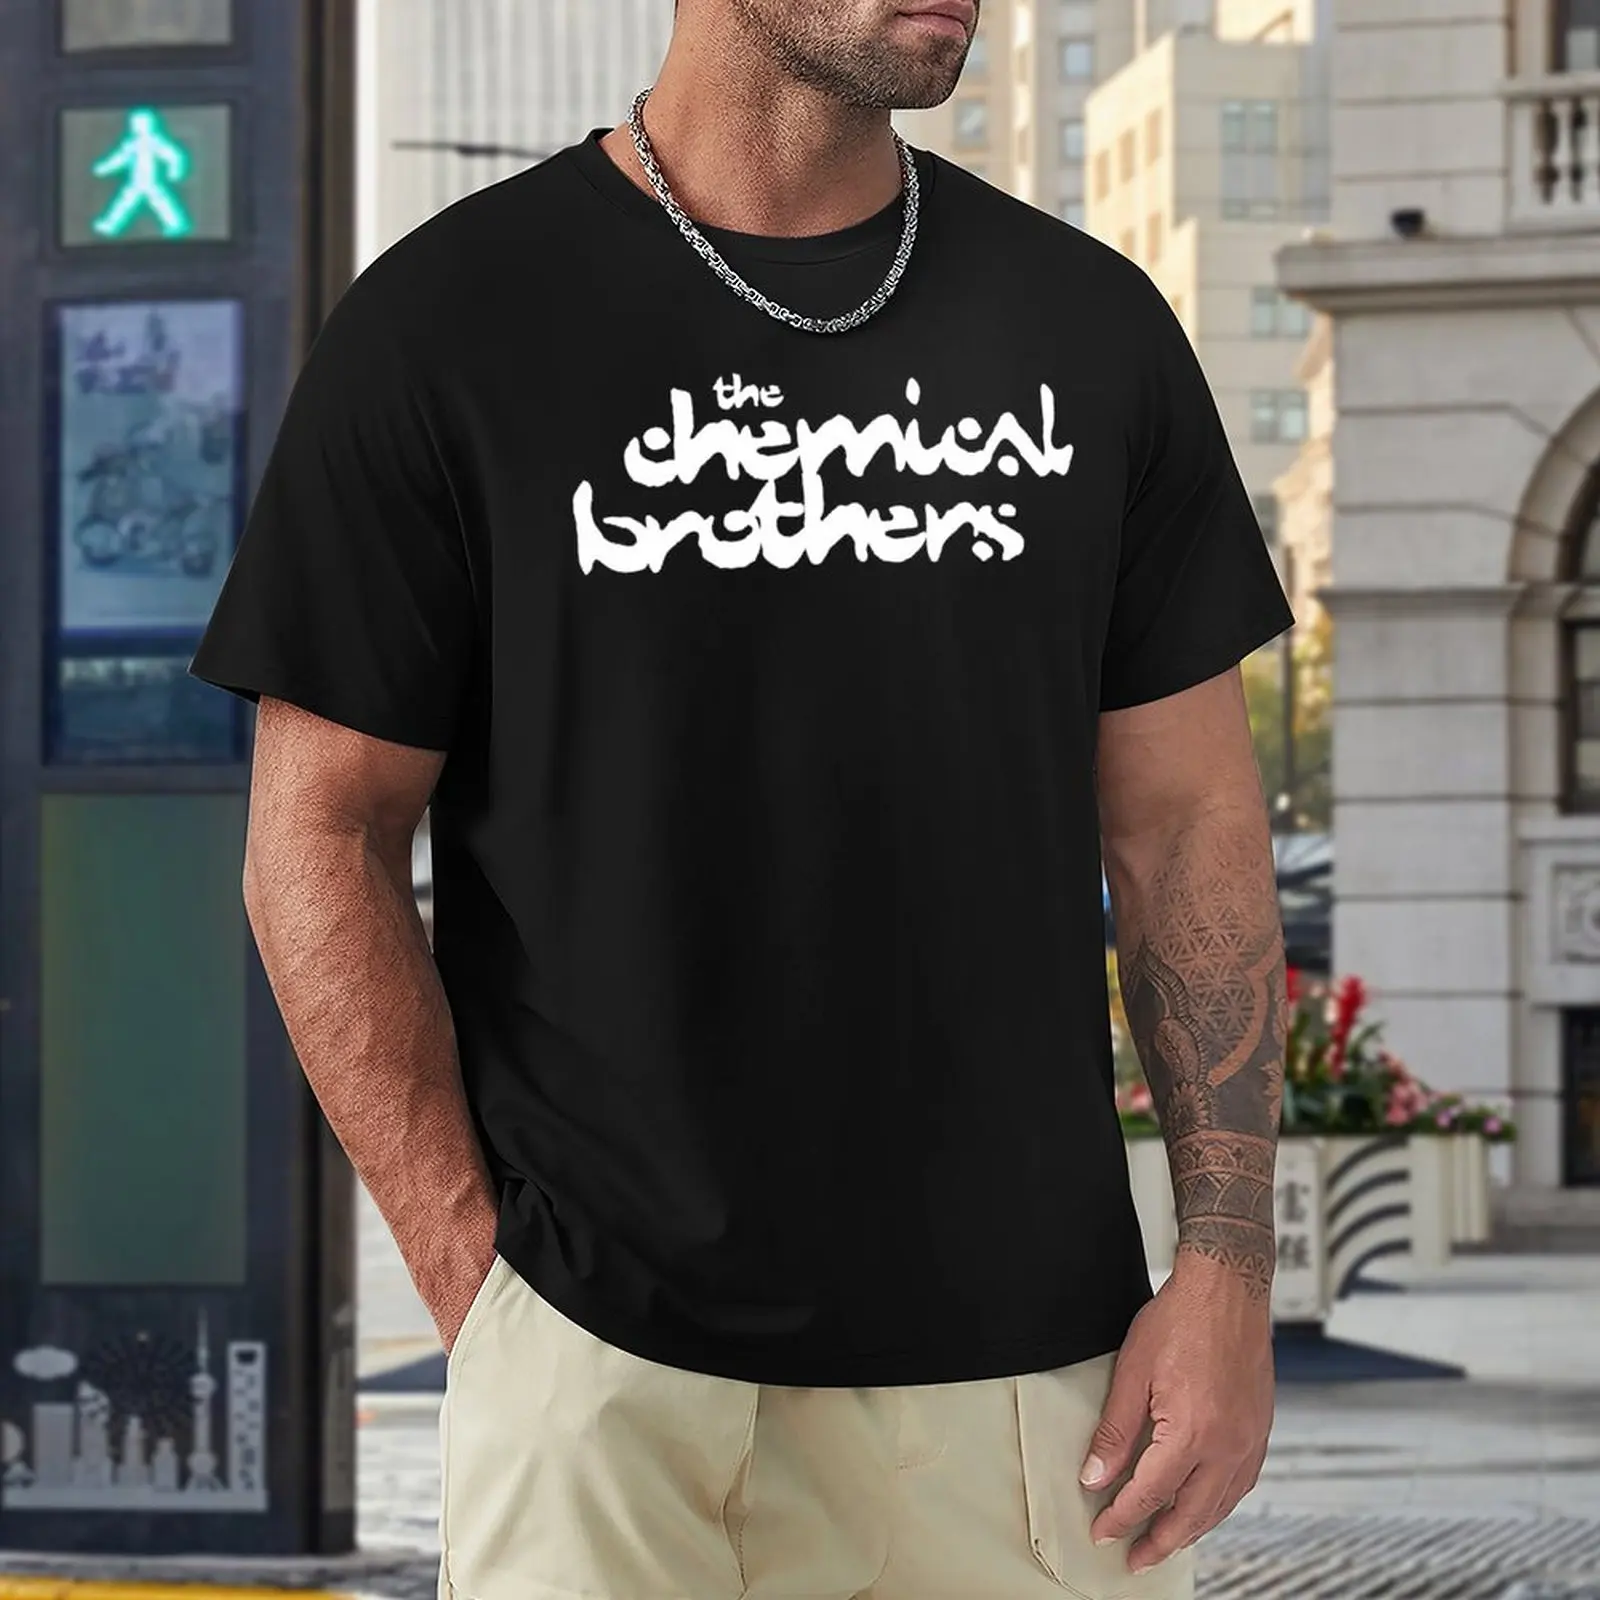 

Hot Sale The Chemical Brothers DJ Set Hotel Umberto Tees High Quality Home Eur Size